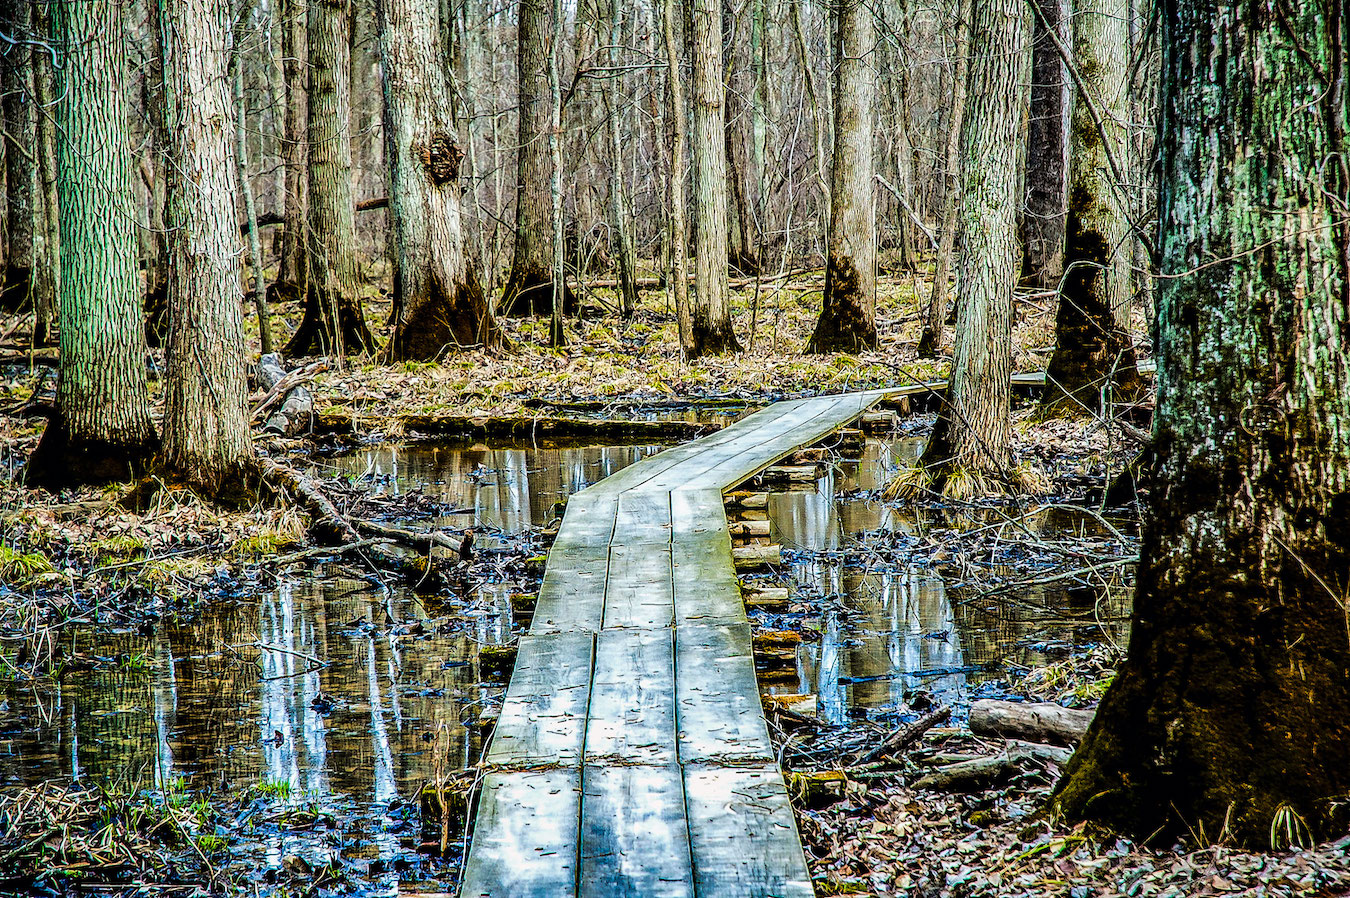 Beanblossom Bottoms Nature Preserve, March 2014—Raised, wooden boardwalks over water, like this one at Beanblossom Bottoms, are common in the Colombian Amazon. The author re-honed his wetland photography techniques at Beanblossom for his trip to the jungle in June.